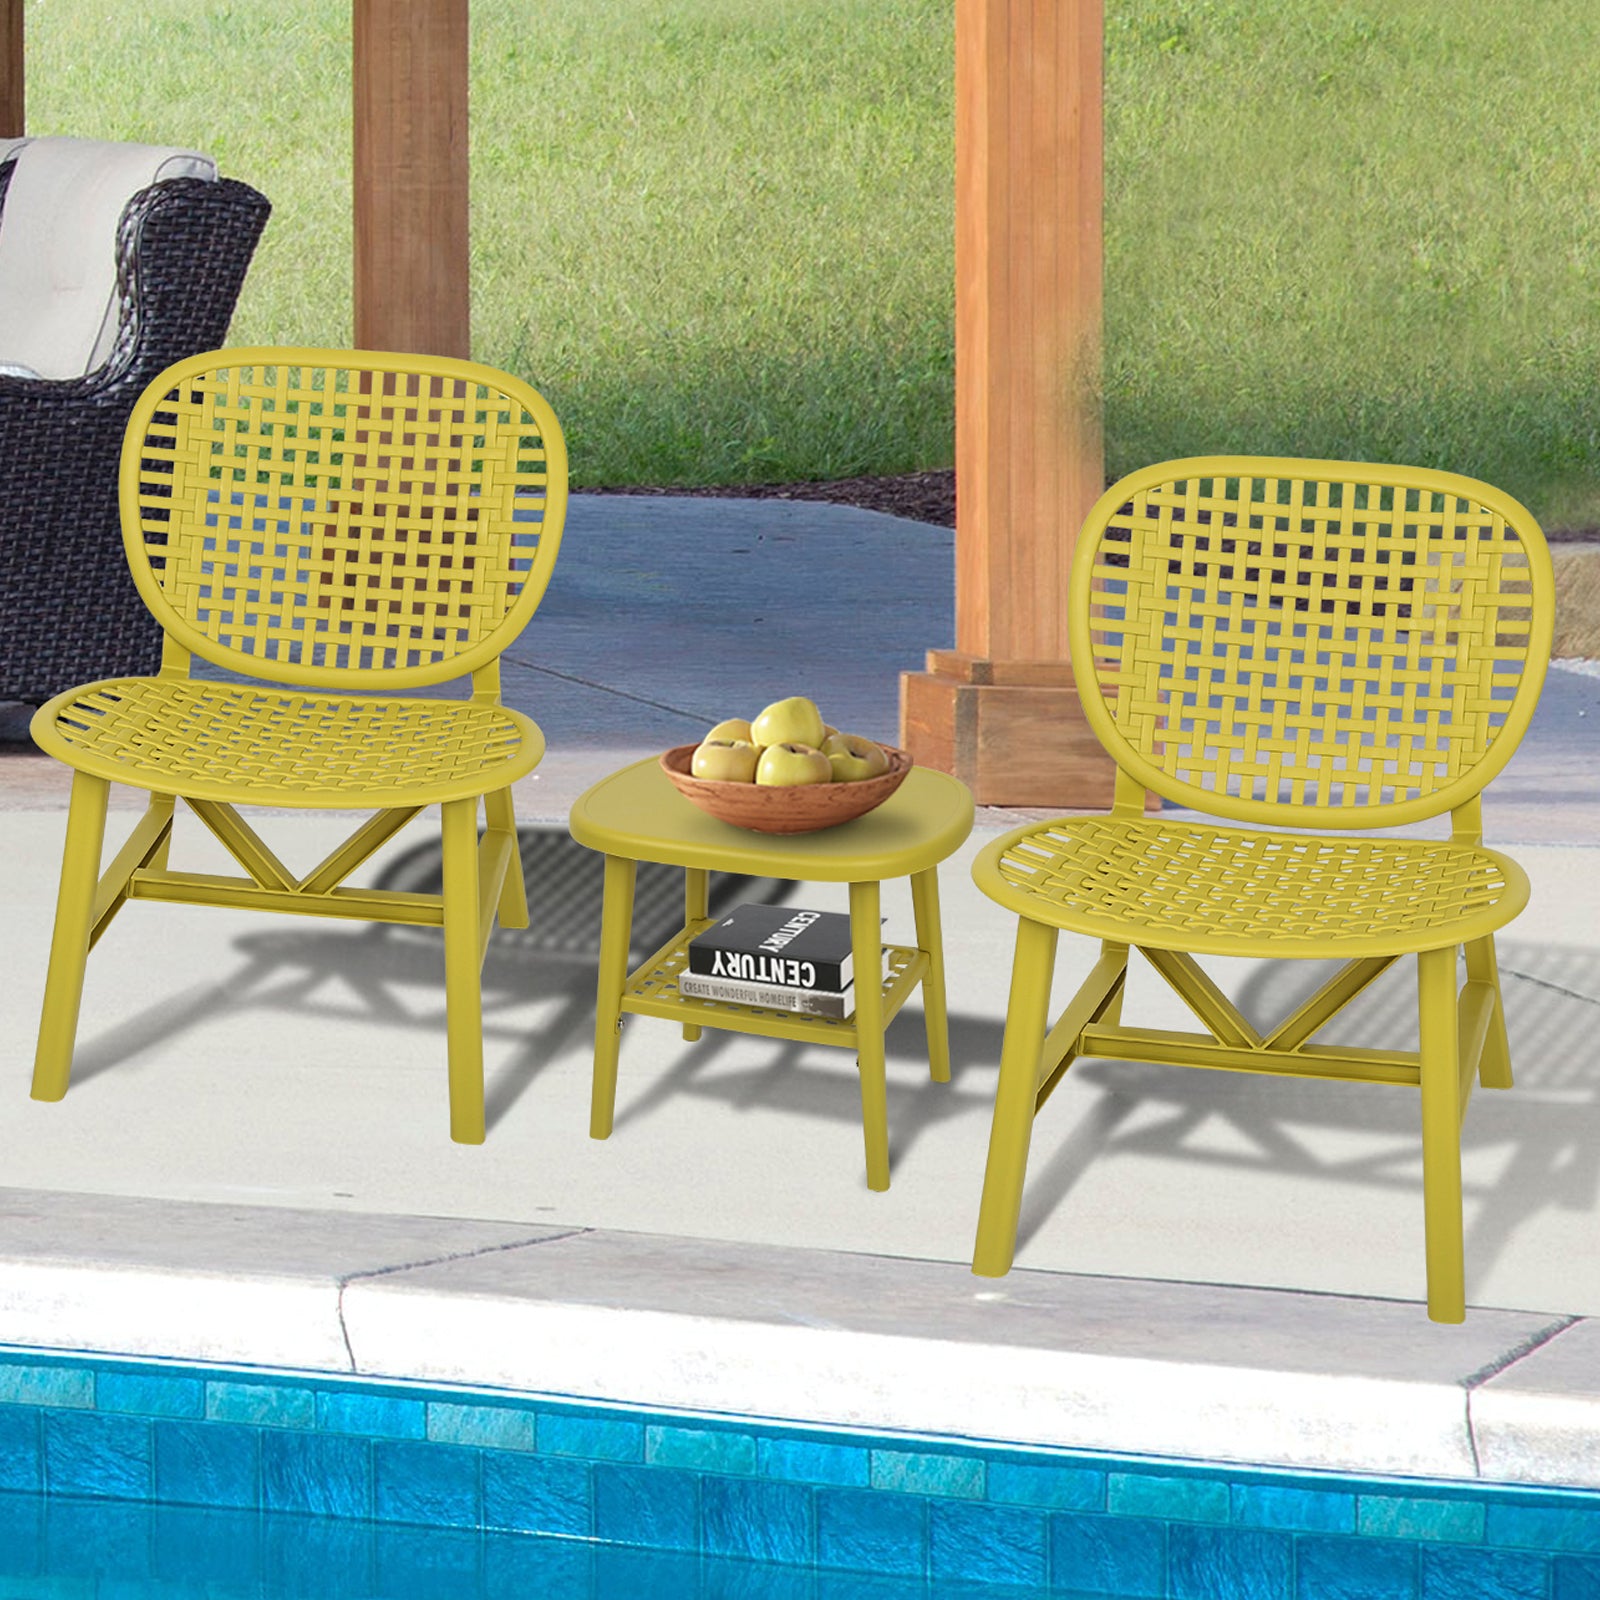 3 Piece Hollow Design Retro Outdoor Patio Table and Lounge Chairs Furniture Set with Open Shelf and Widened Seats (Yellow)